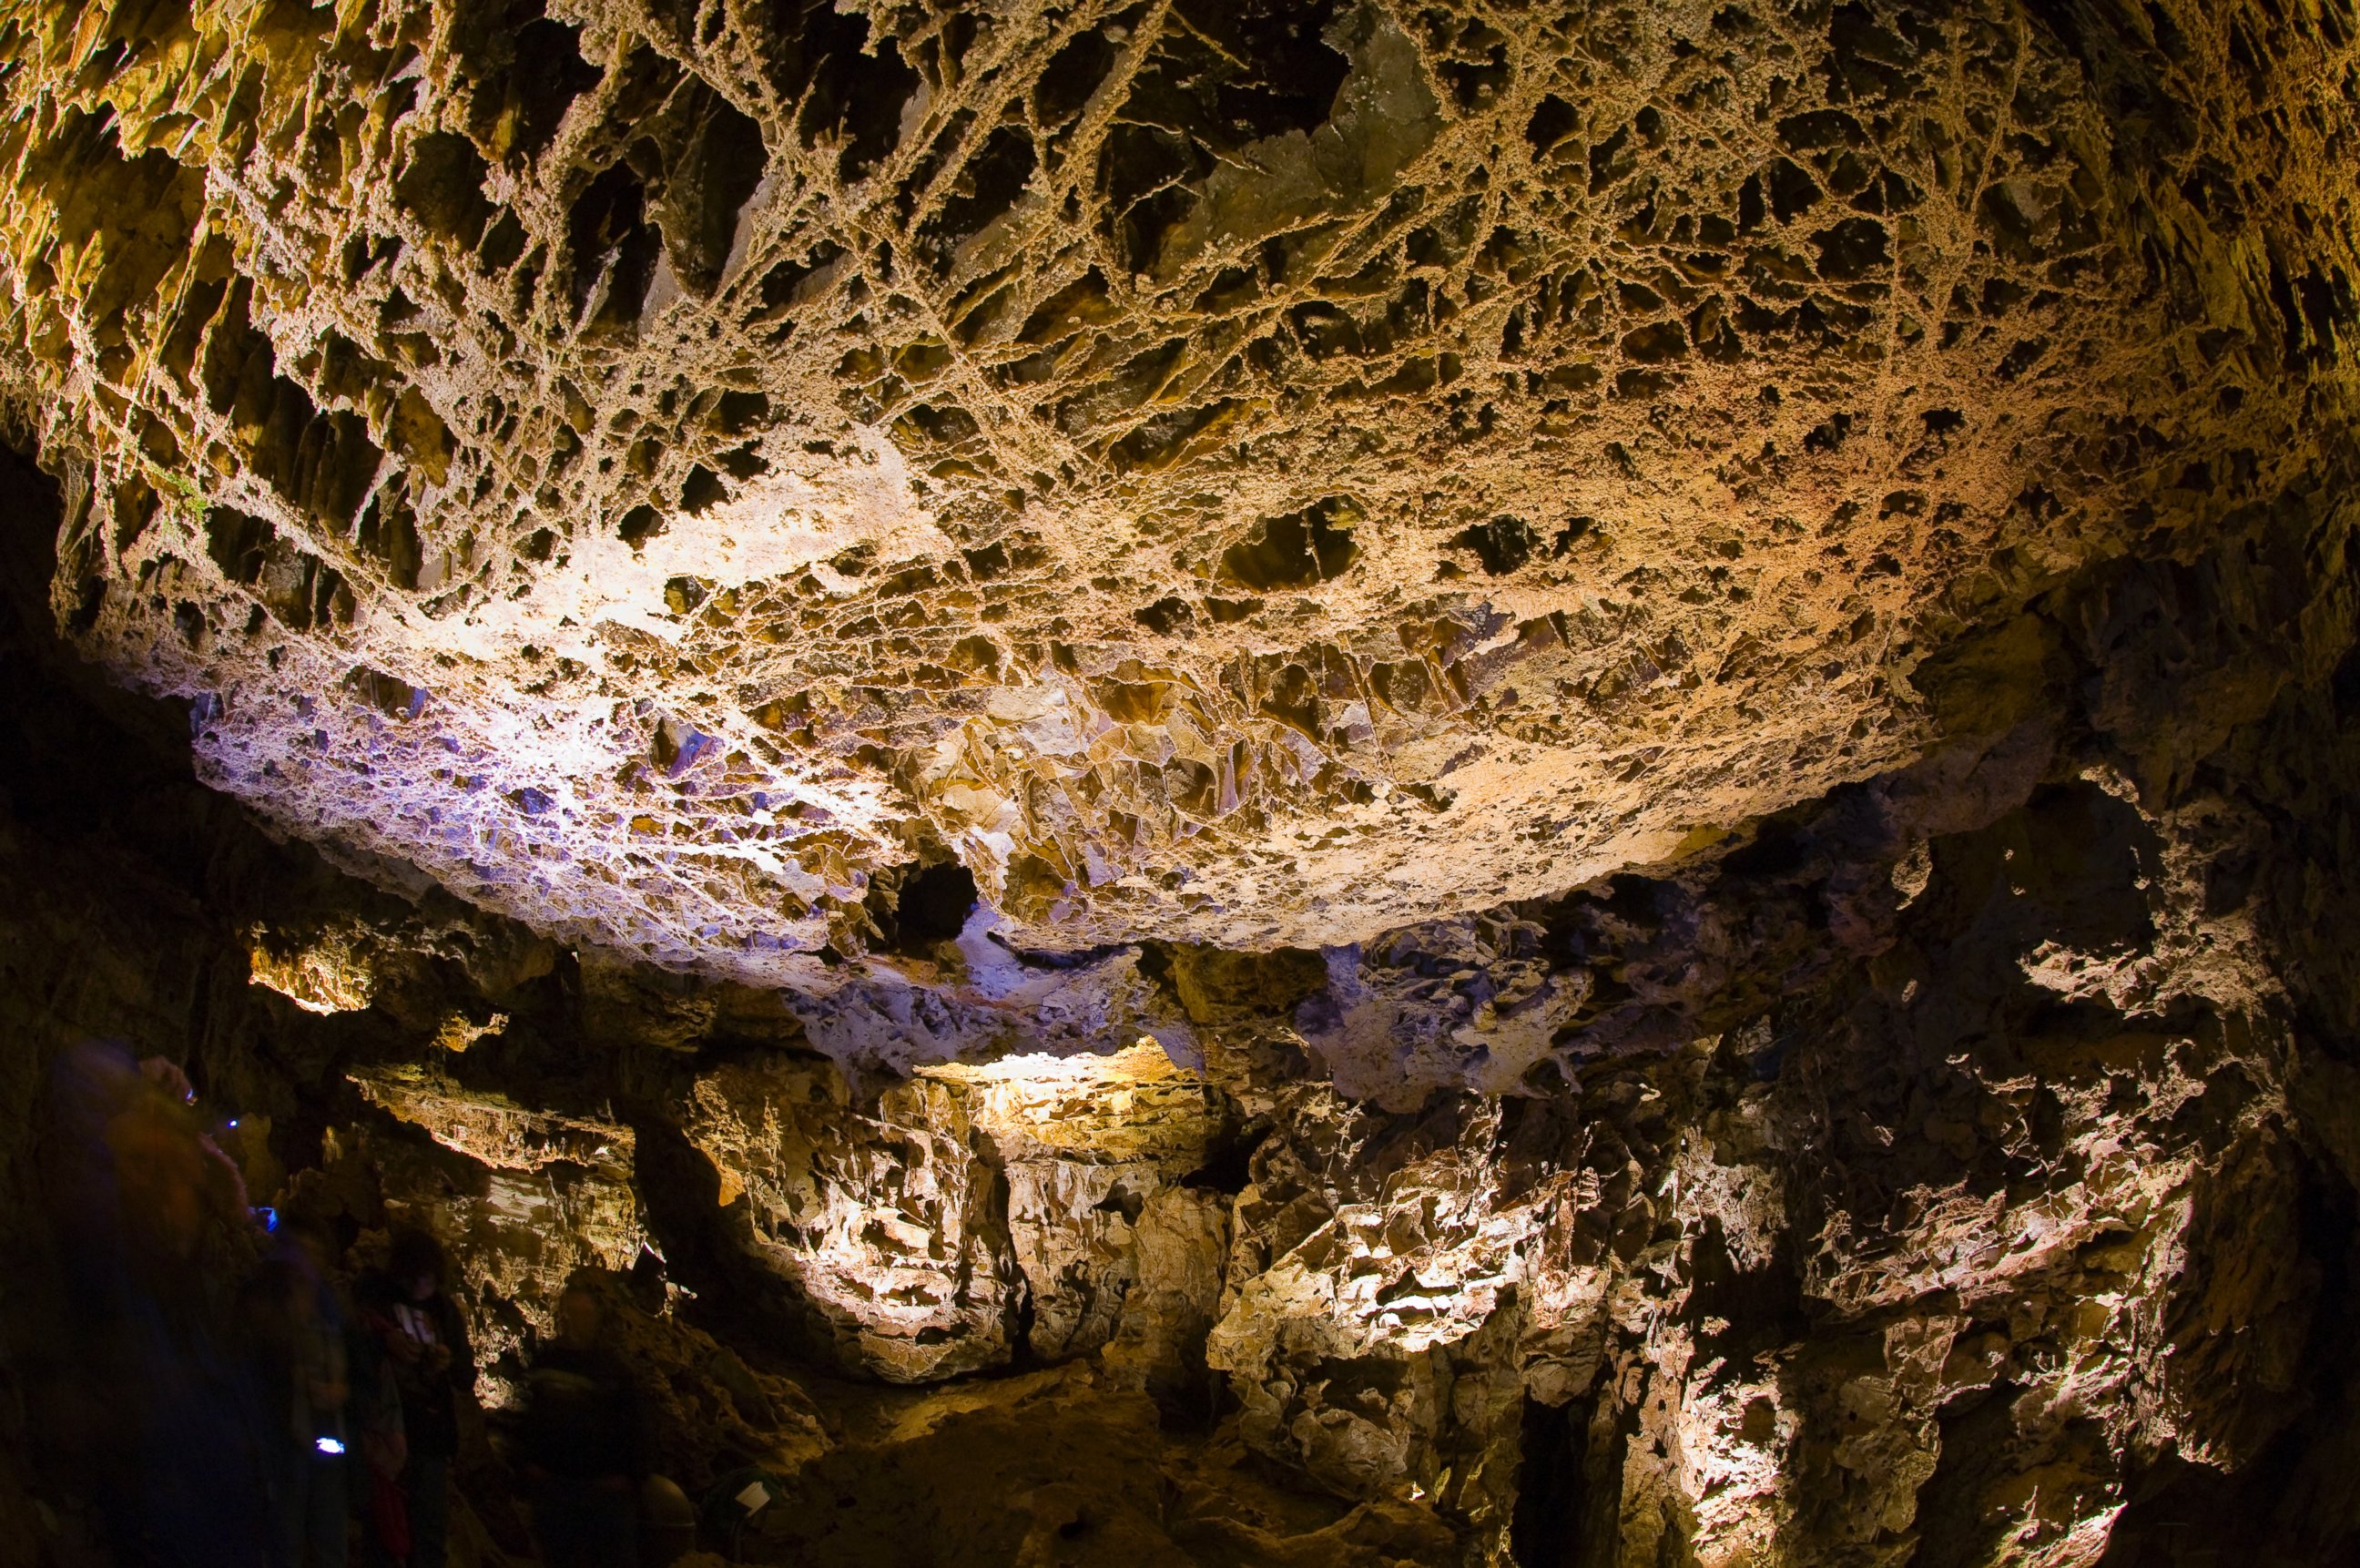 PHOTO: Boxwork or a honeycomb pattern, is seen here on the ceiling of Wind Cave National Park, South Dakota.